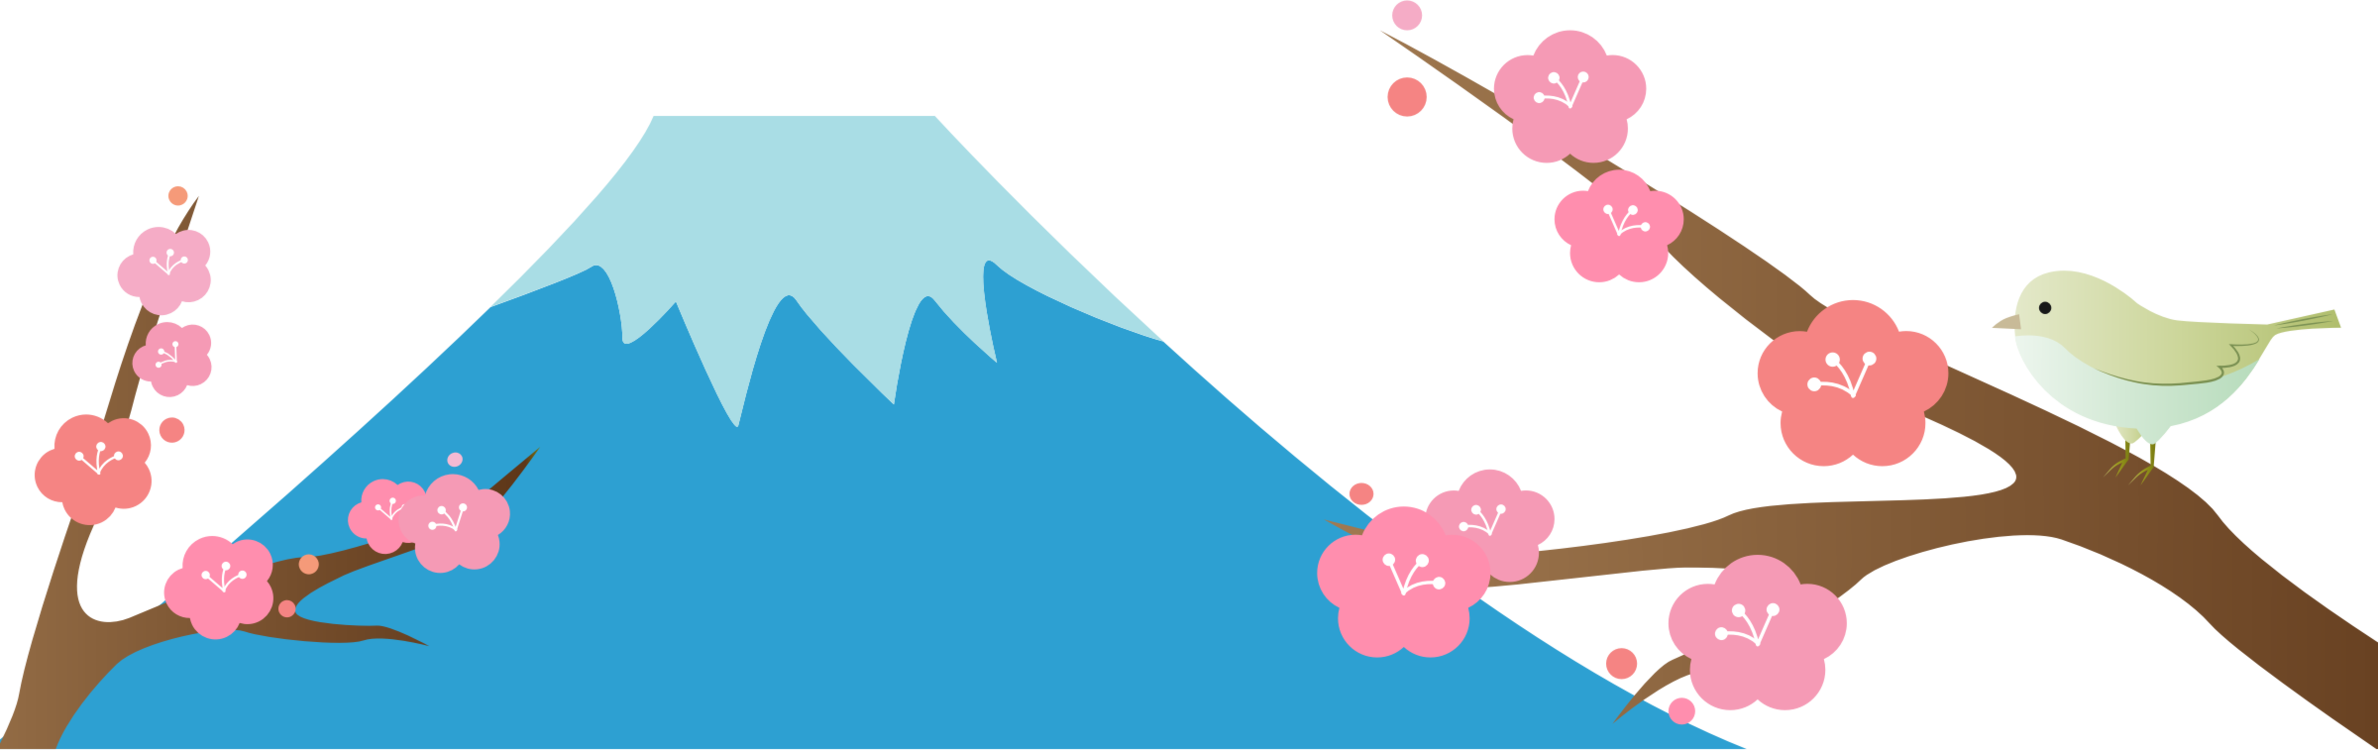 A Mountain With Pink Flowers